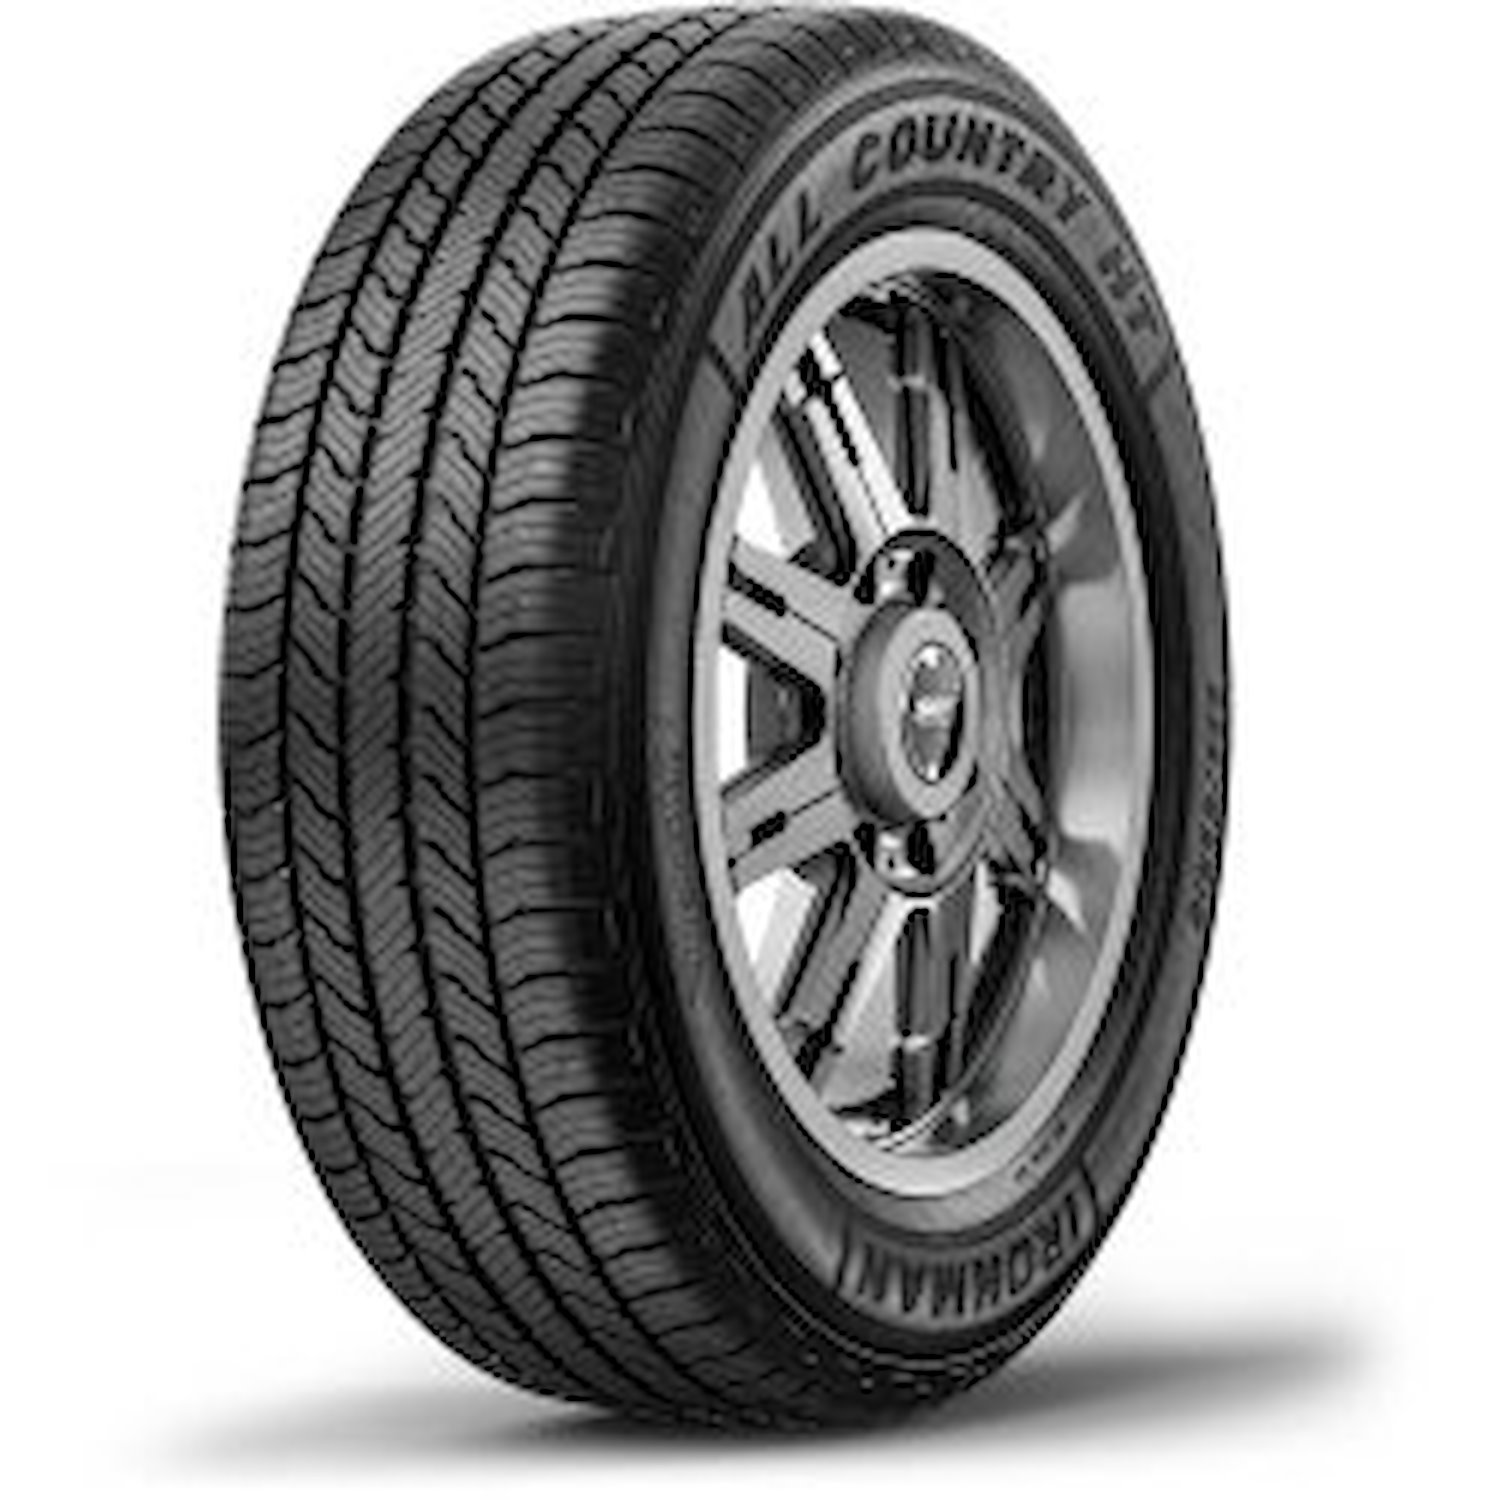 03132 All Country HT Tire, 265/60R18, 110H